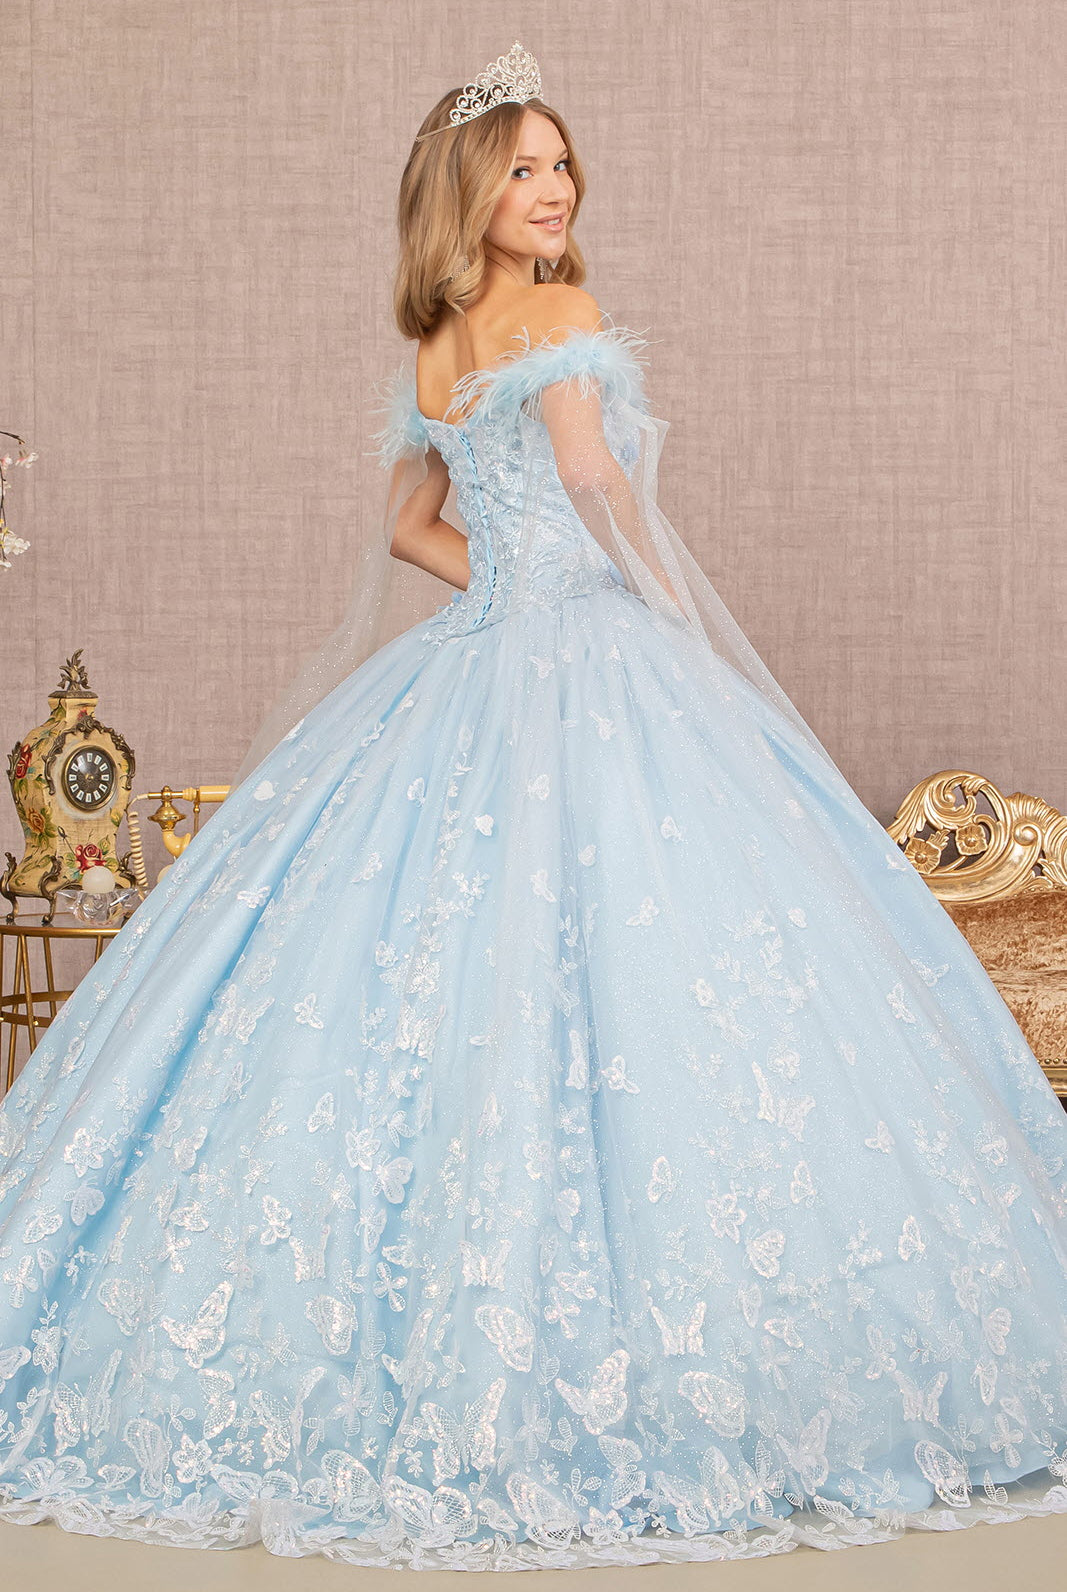 Feather 3-D Flower Quinceanera Gown Detachable Side Mesh Layer GLGL3166-QUINCEANERA-smcfashion.com